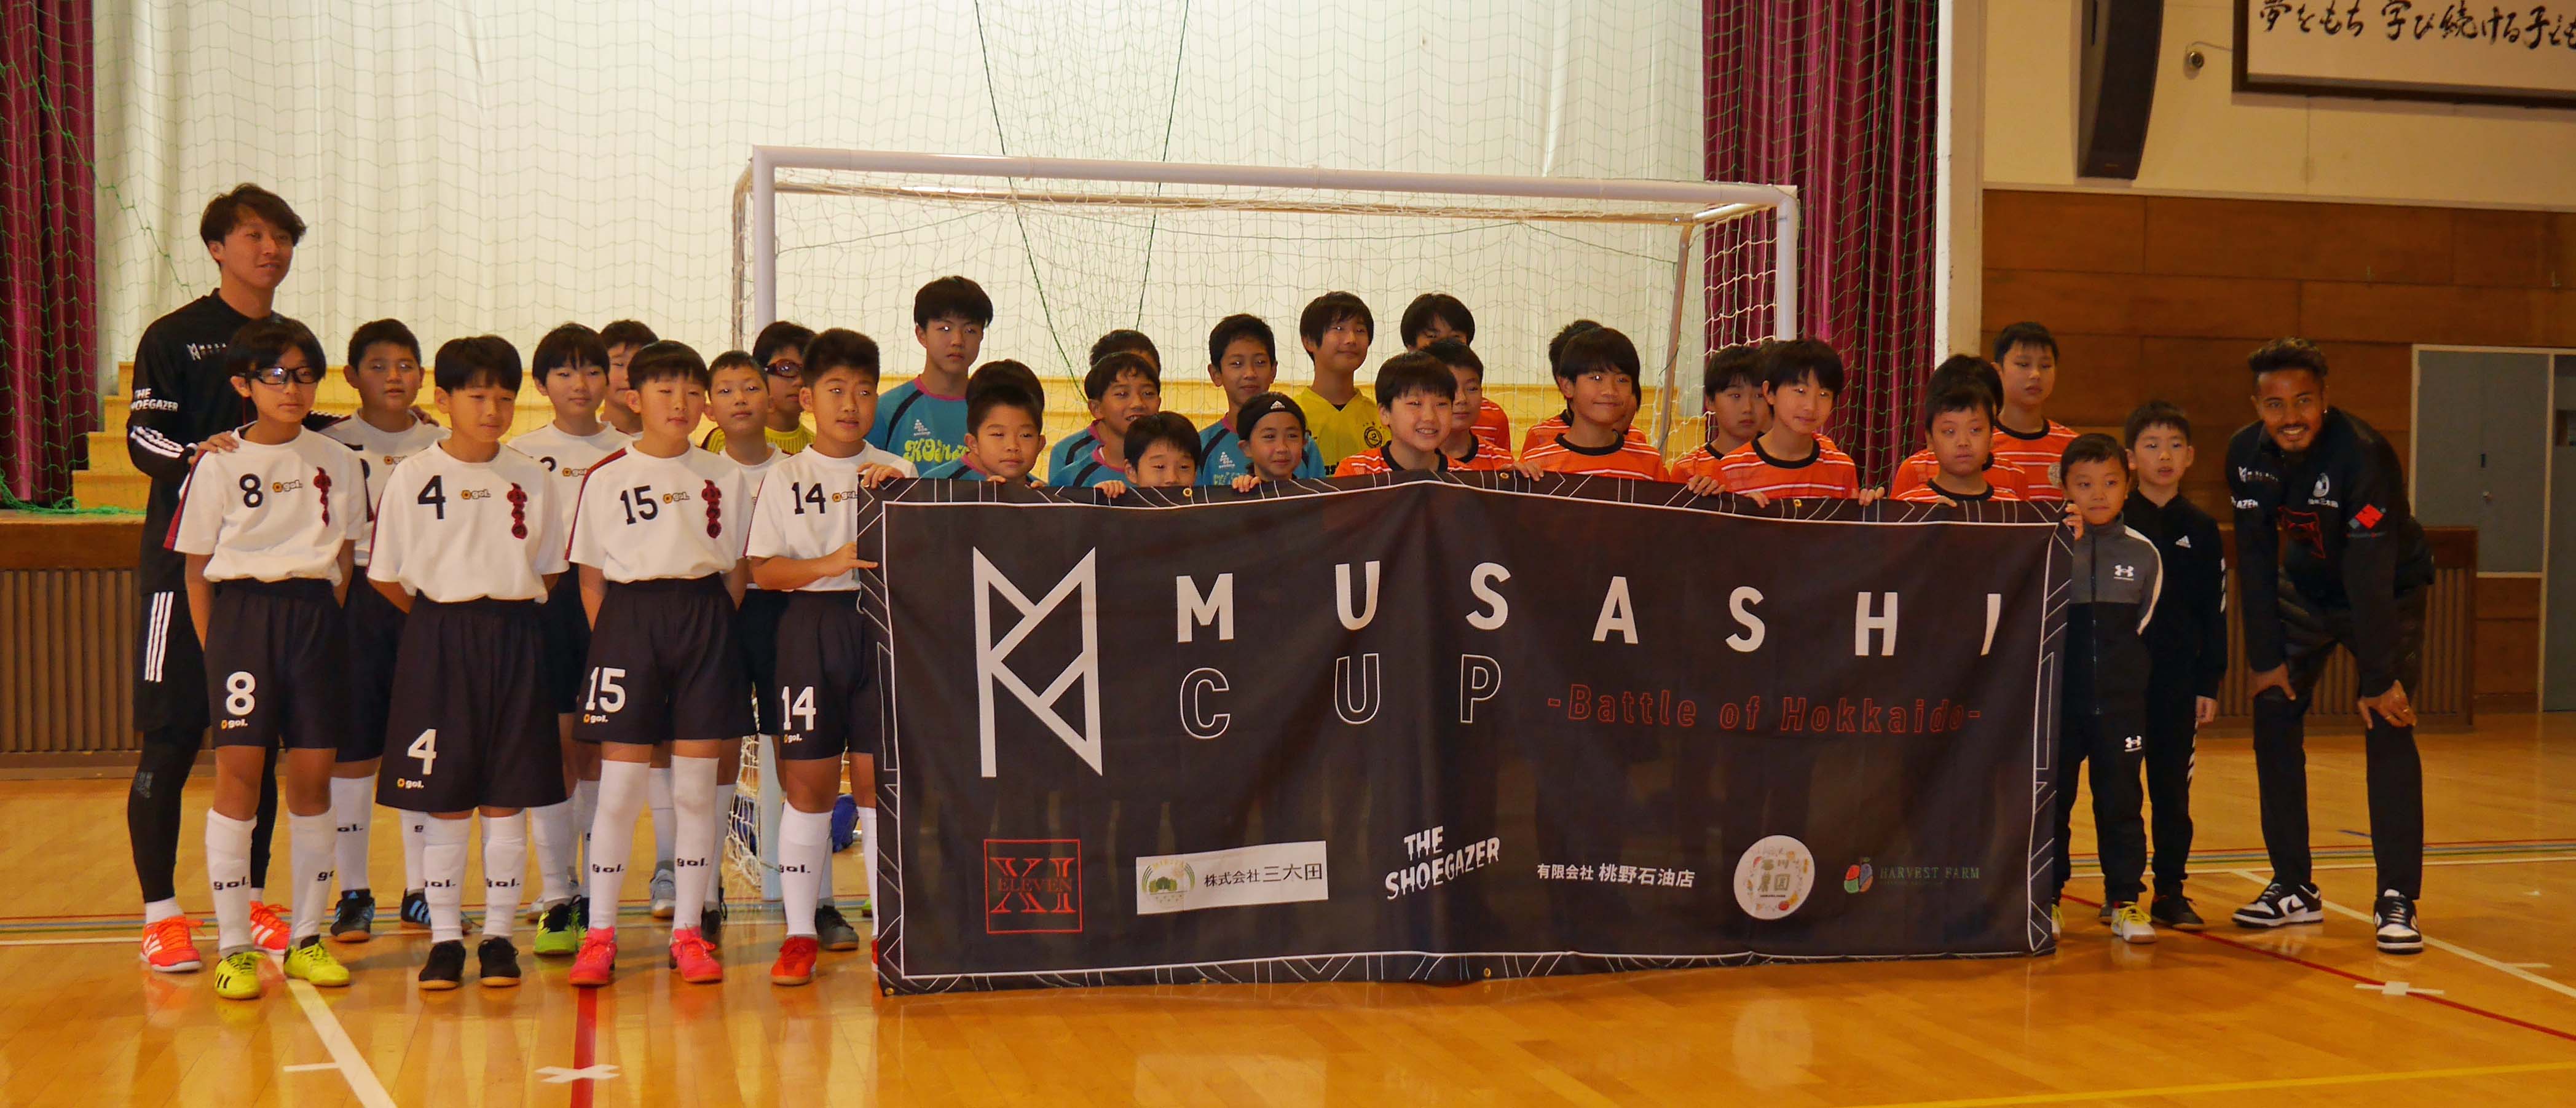 20221126_MUSASHICUP01-1